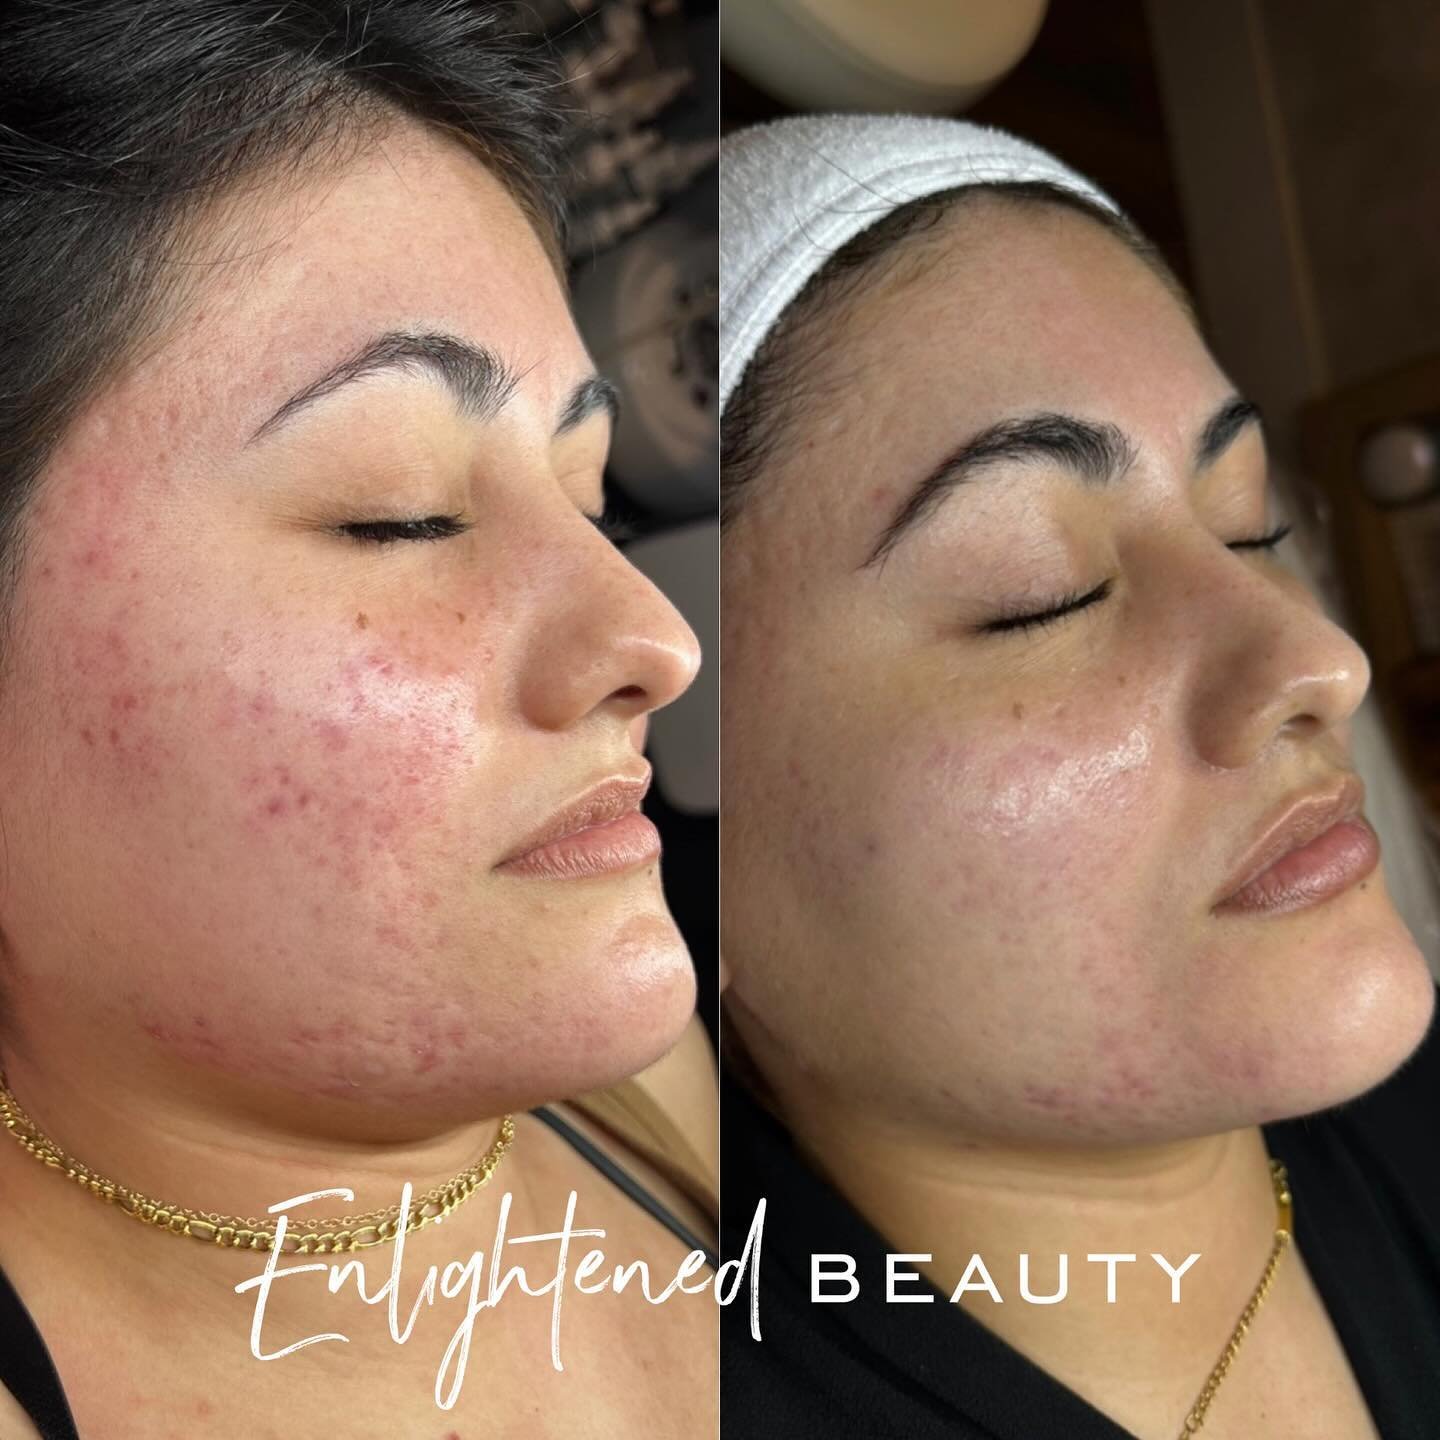 We have been working so hard to get her skin as close as possible to what it was before she had a single break out.

We have made so much incredible progress with deep treatments and strict homecare. Seeing this makes me SO EXCITED for my new device 